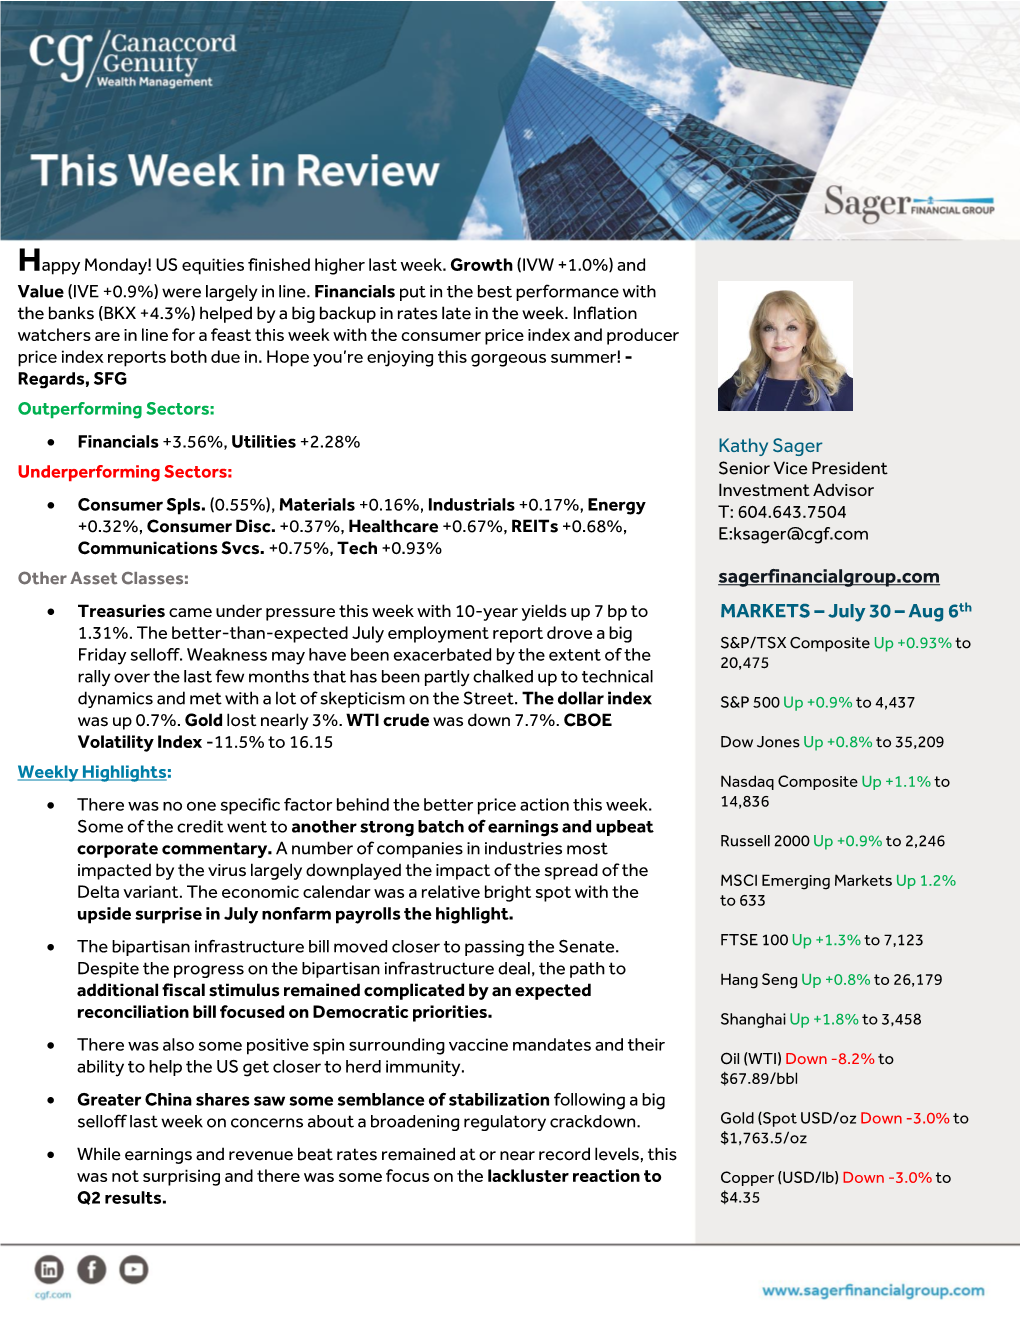 Happy Monday! US Equities Finished Higher Last Week. Growth (IVW +1.0%) and Value (IVE +0.9%) Were Largely in Line